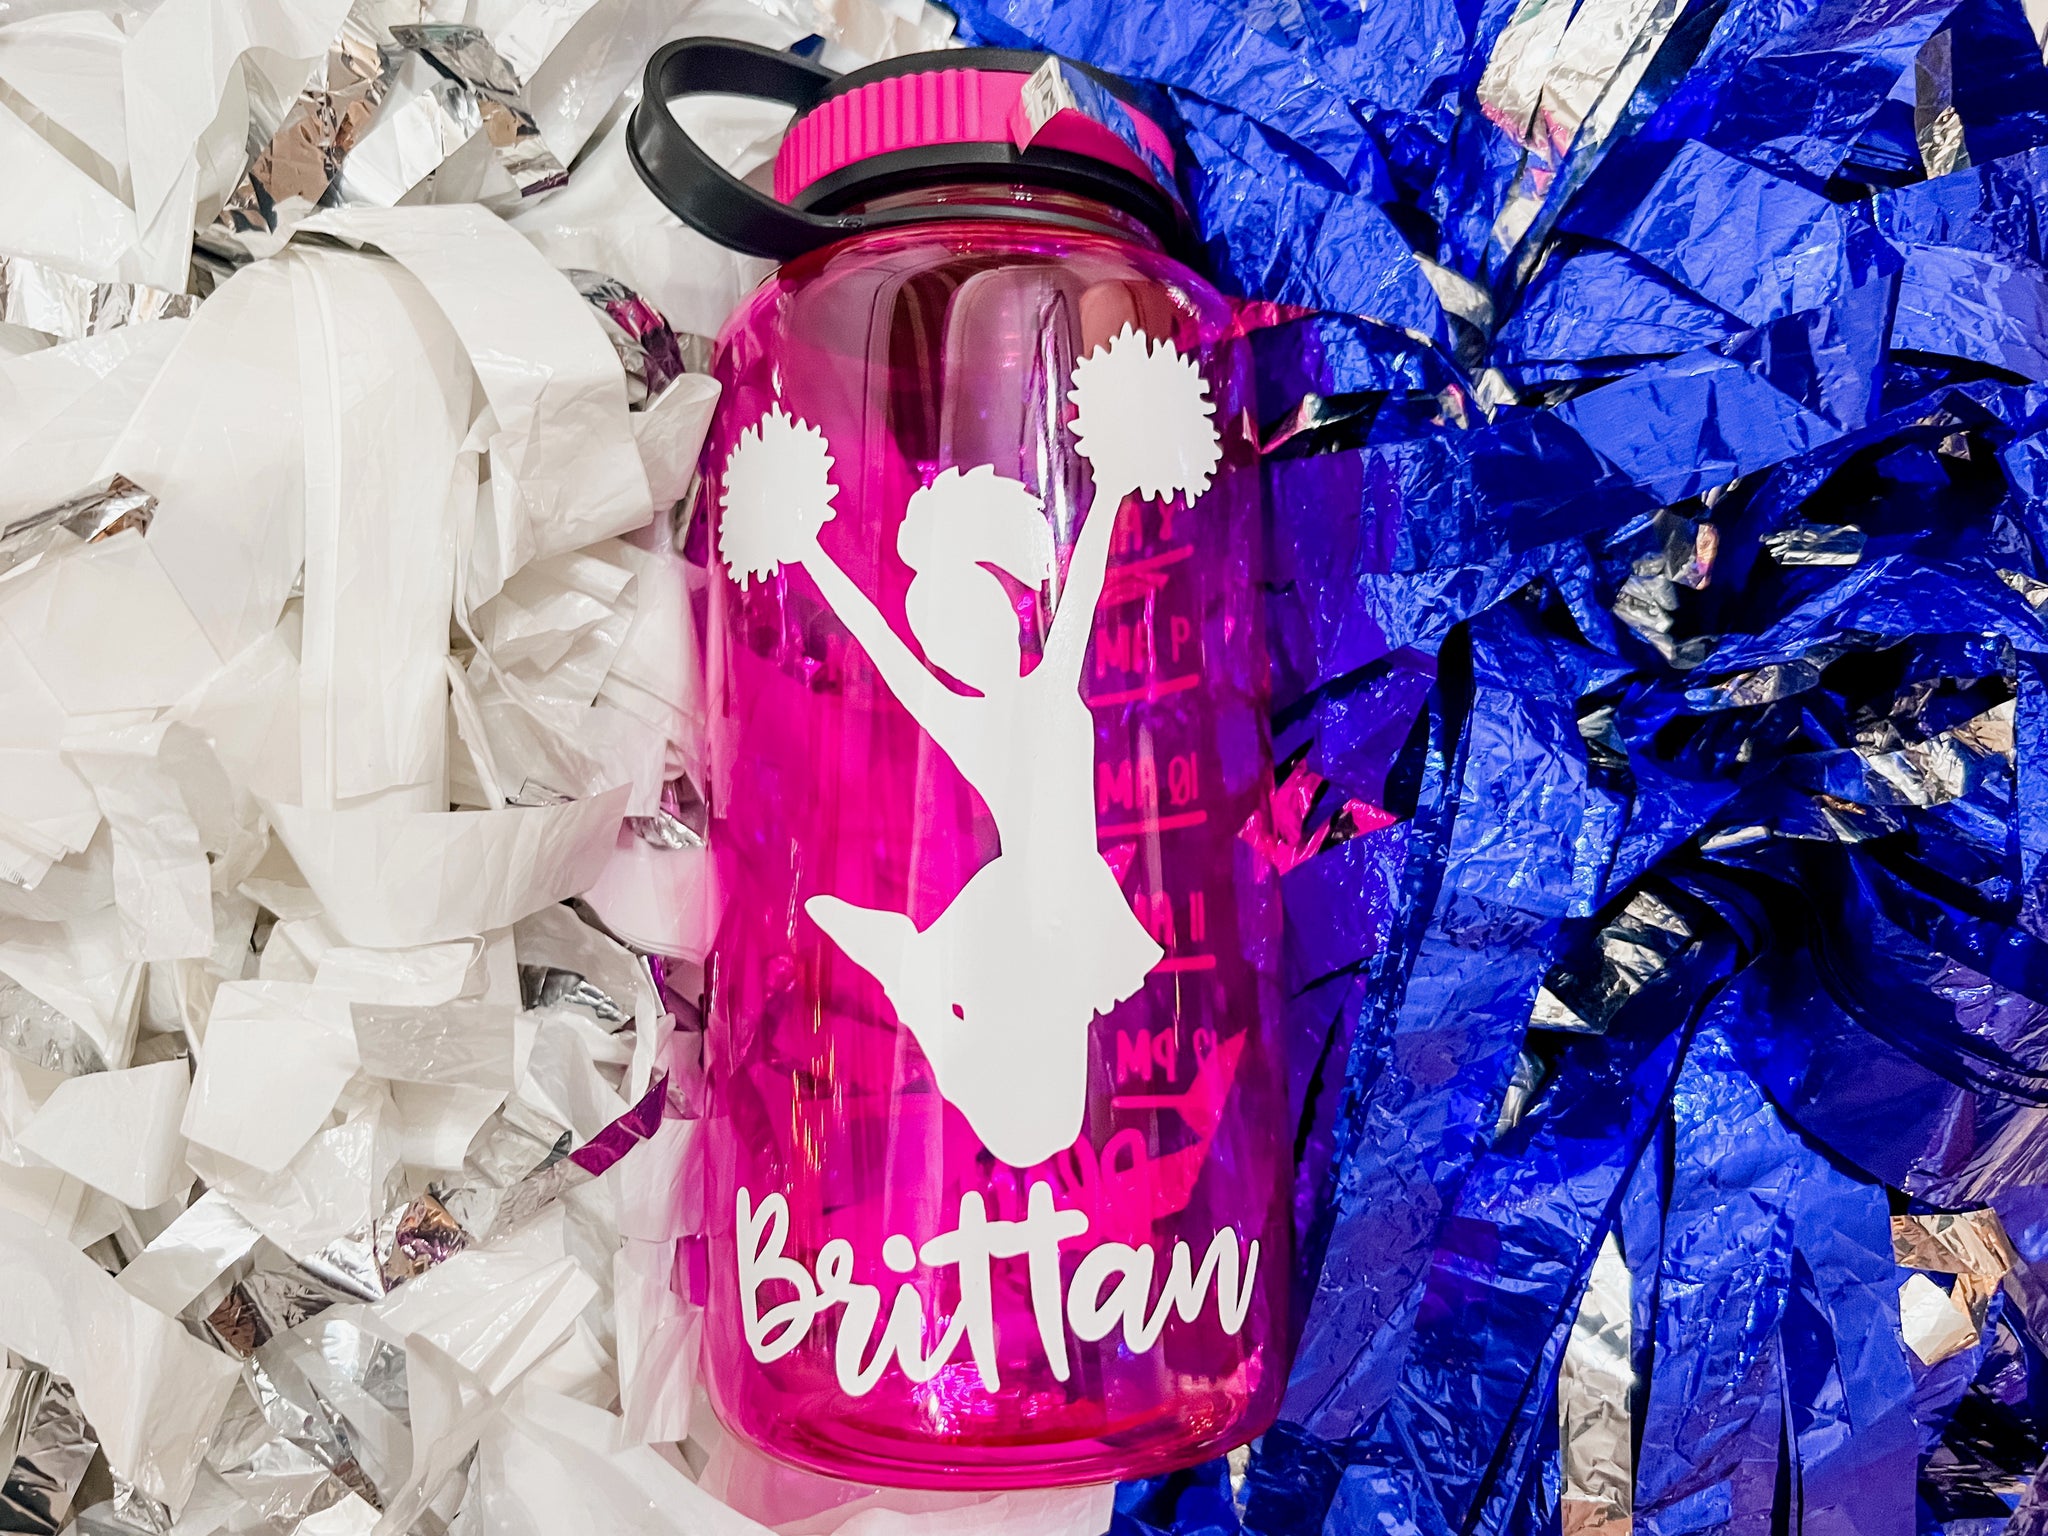 CHARM Water Bottle — CHARM: Voices of Baltimore Youth